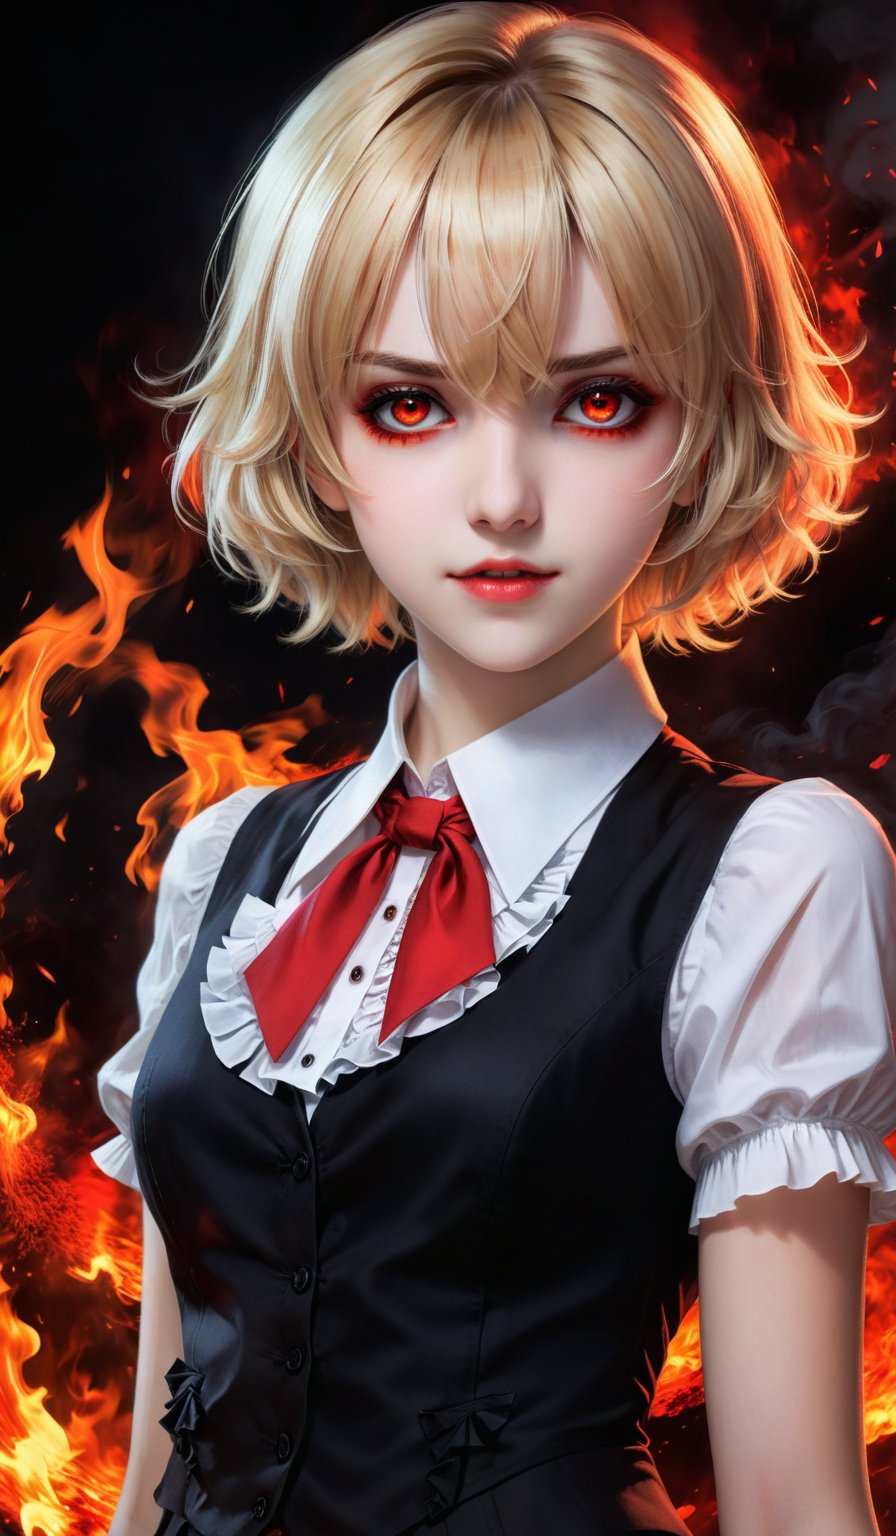 A stunning realistic illustration of Rumia in a masterful blend of style and best quality. The score_9 composition features a dramatic long exposure shot with intense red eyes shining like embers. Blonde hair cascades down her back, framing the striking frilled blouse and black vest. A fiery red collar adds a pop of color, while HDR techniques enhance the overall contrast, creating an immersive experience.